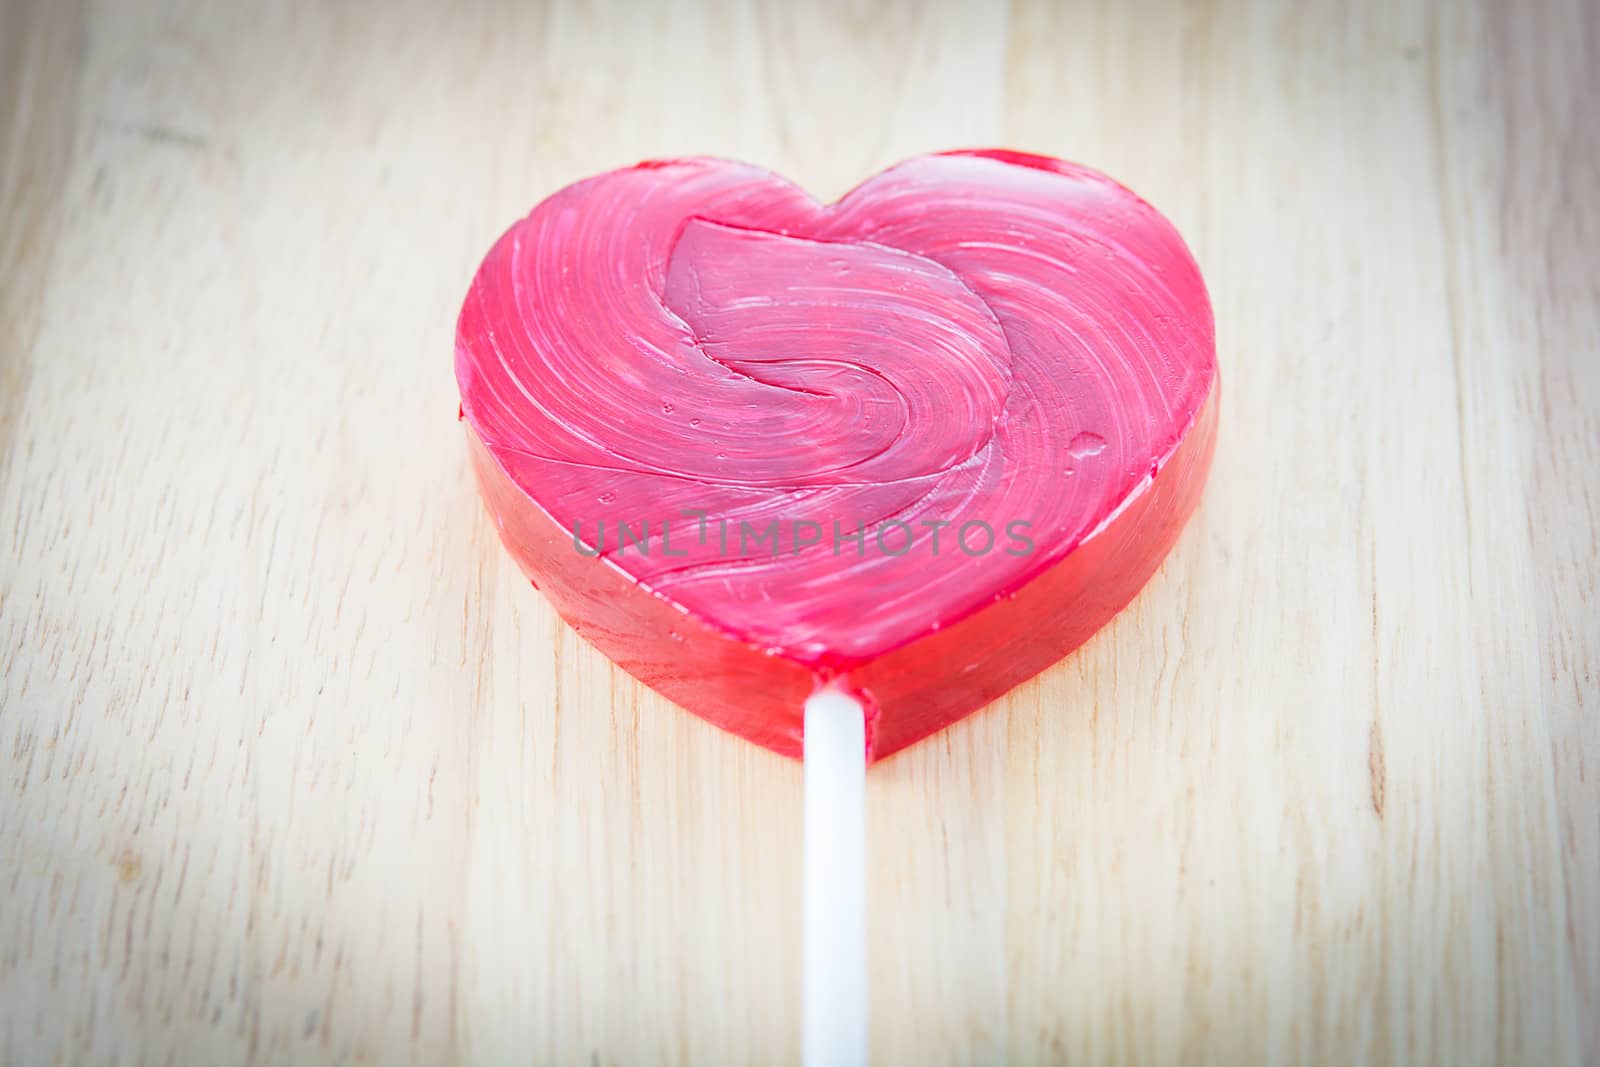 Heart shaped colorful lollipop on wooden background